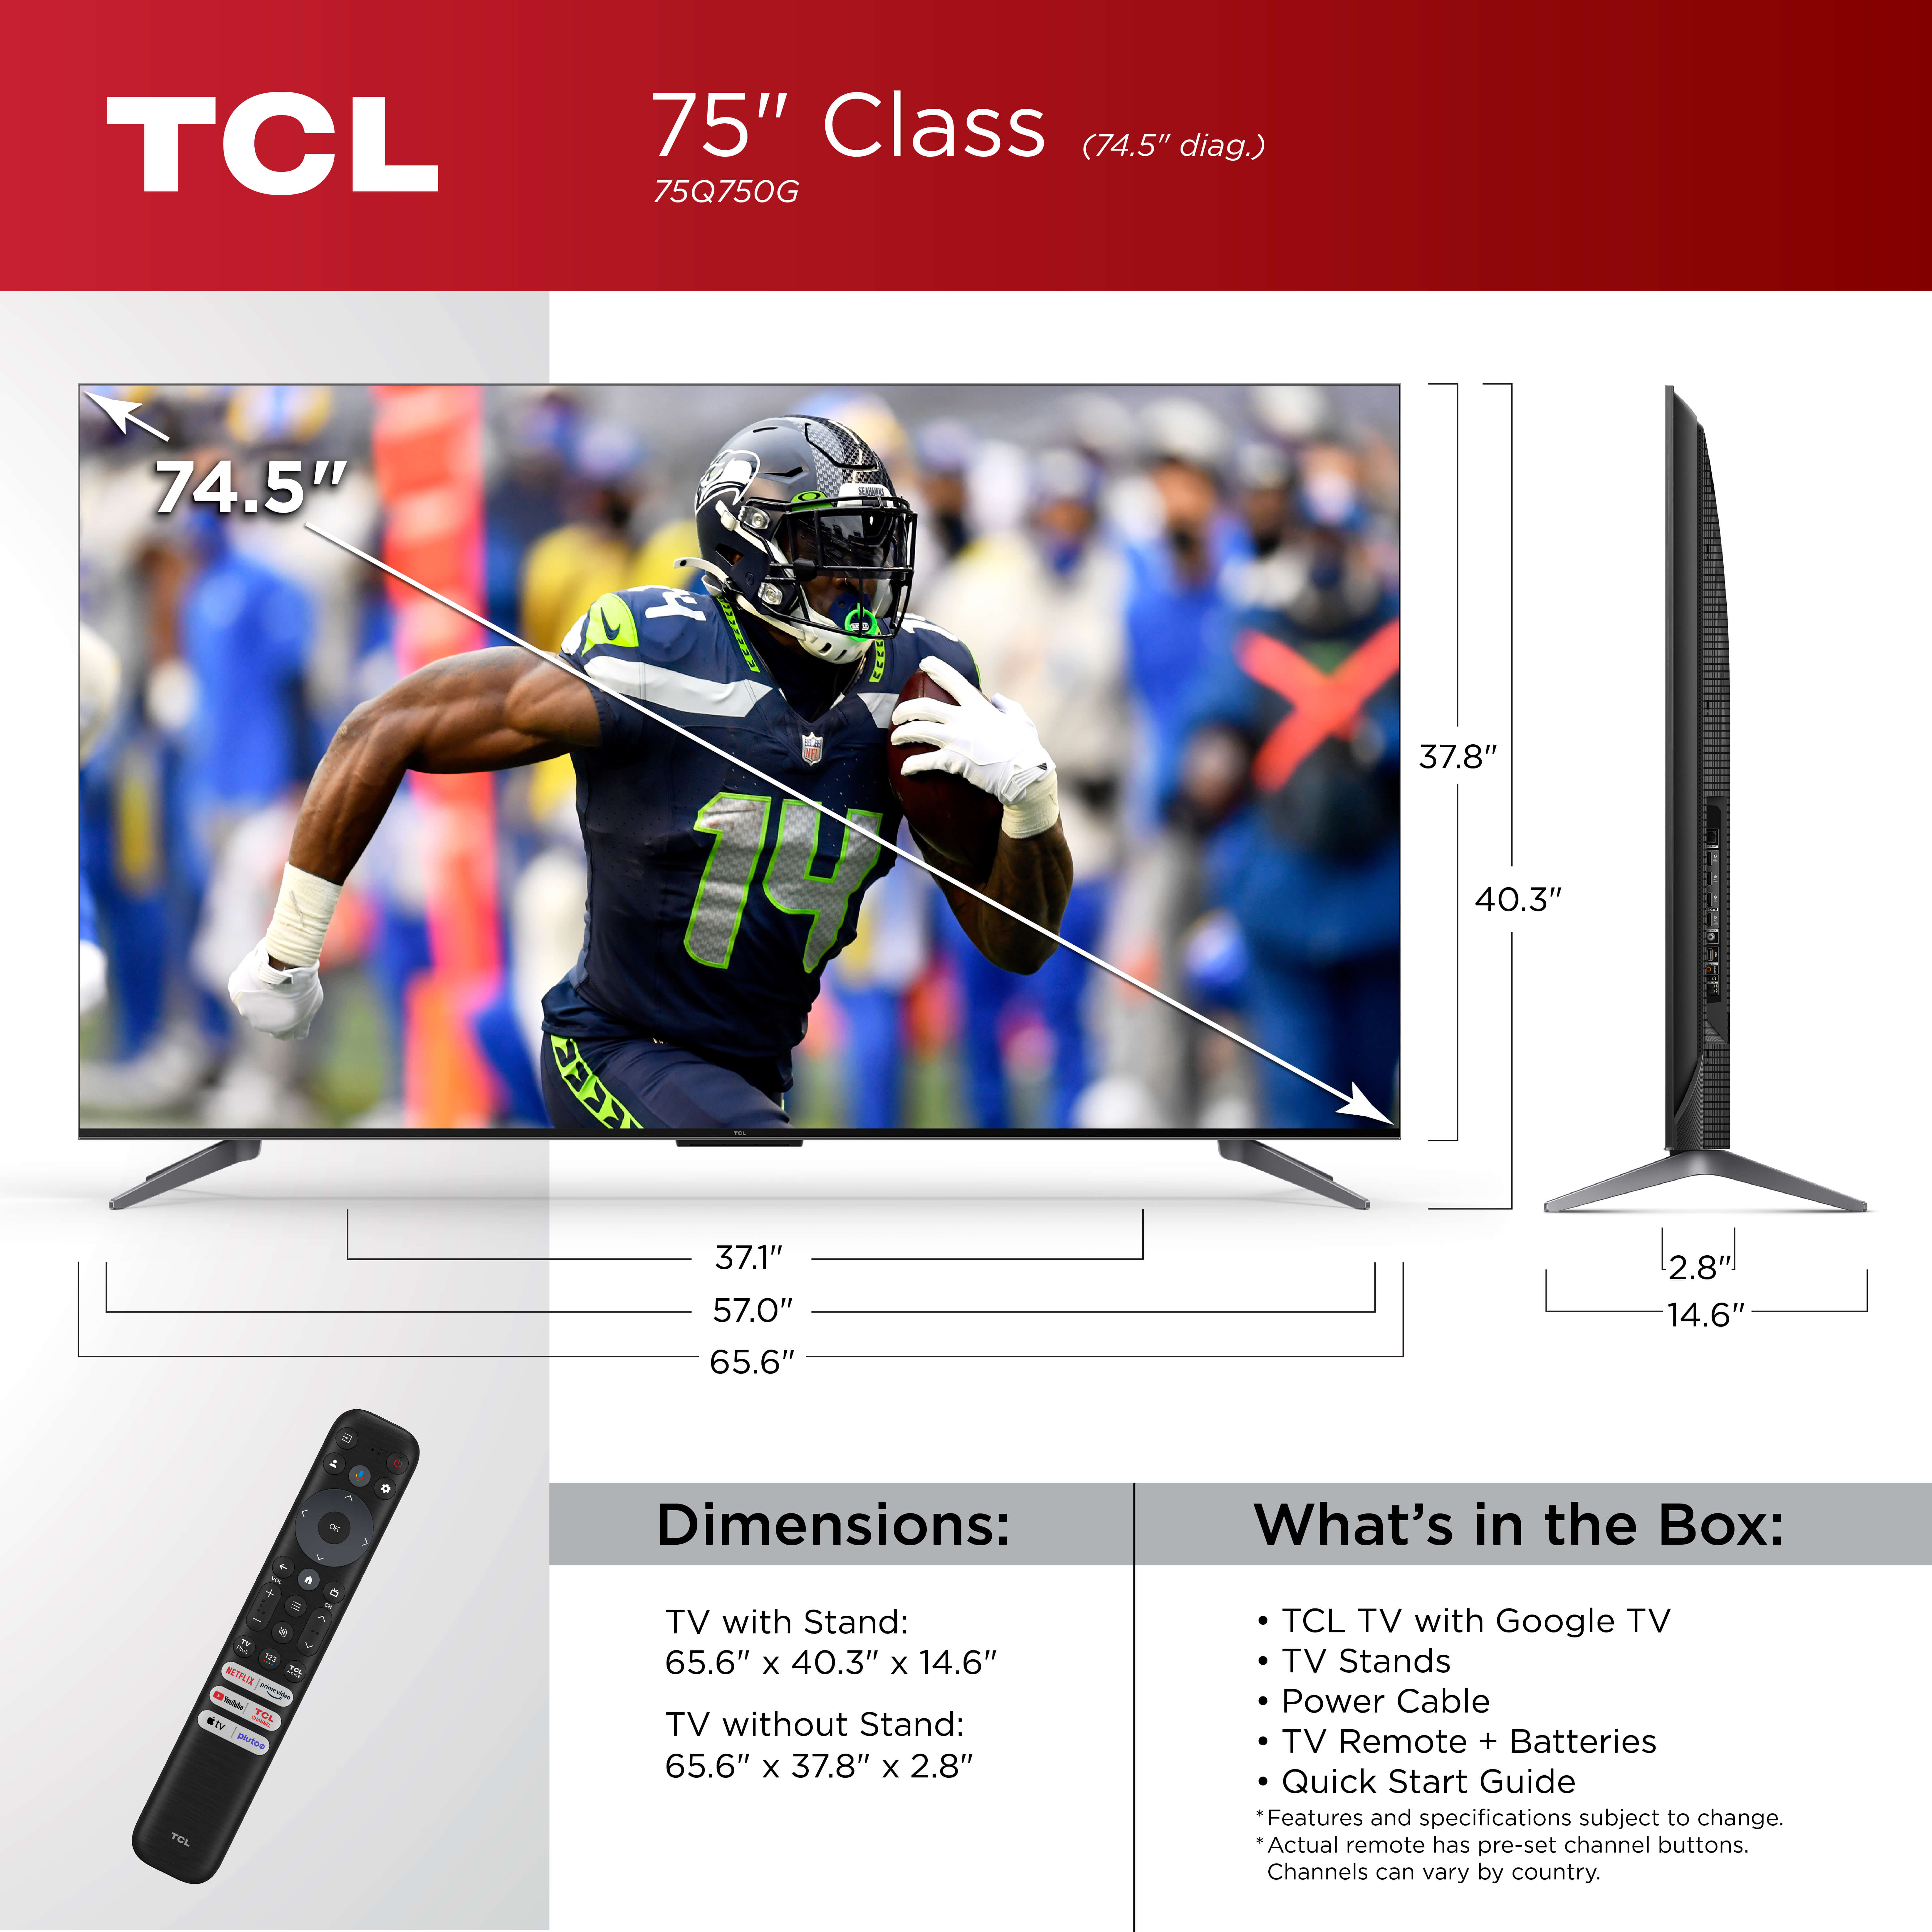 TCL 75” Class Q Class 4K QLED HDR Smart TV with Google TV, 75Q750G - image 4 of 22